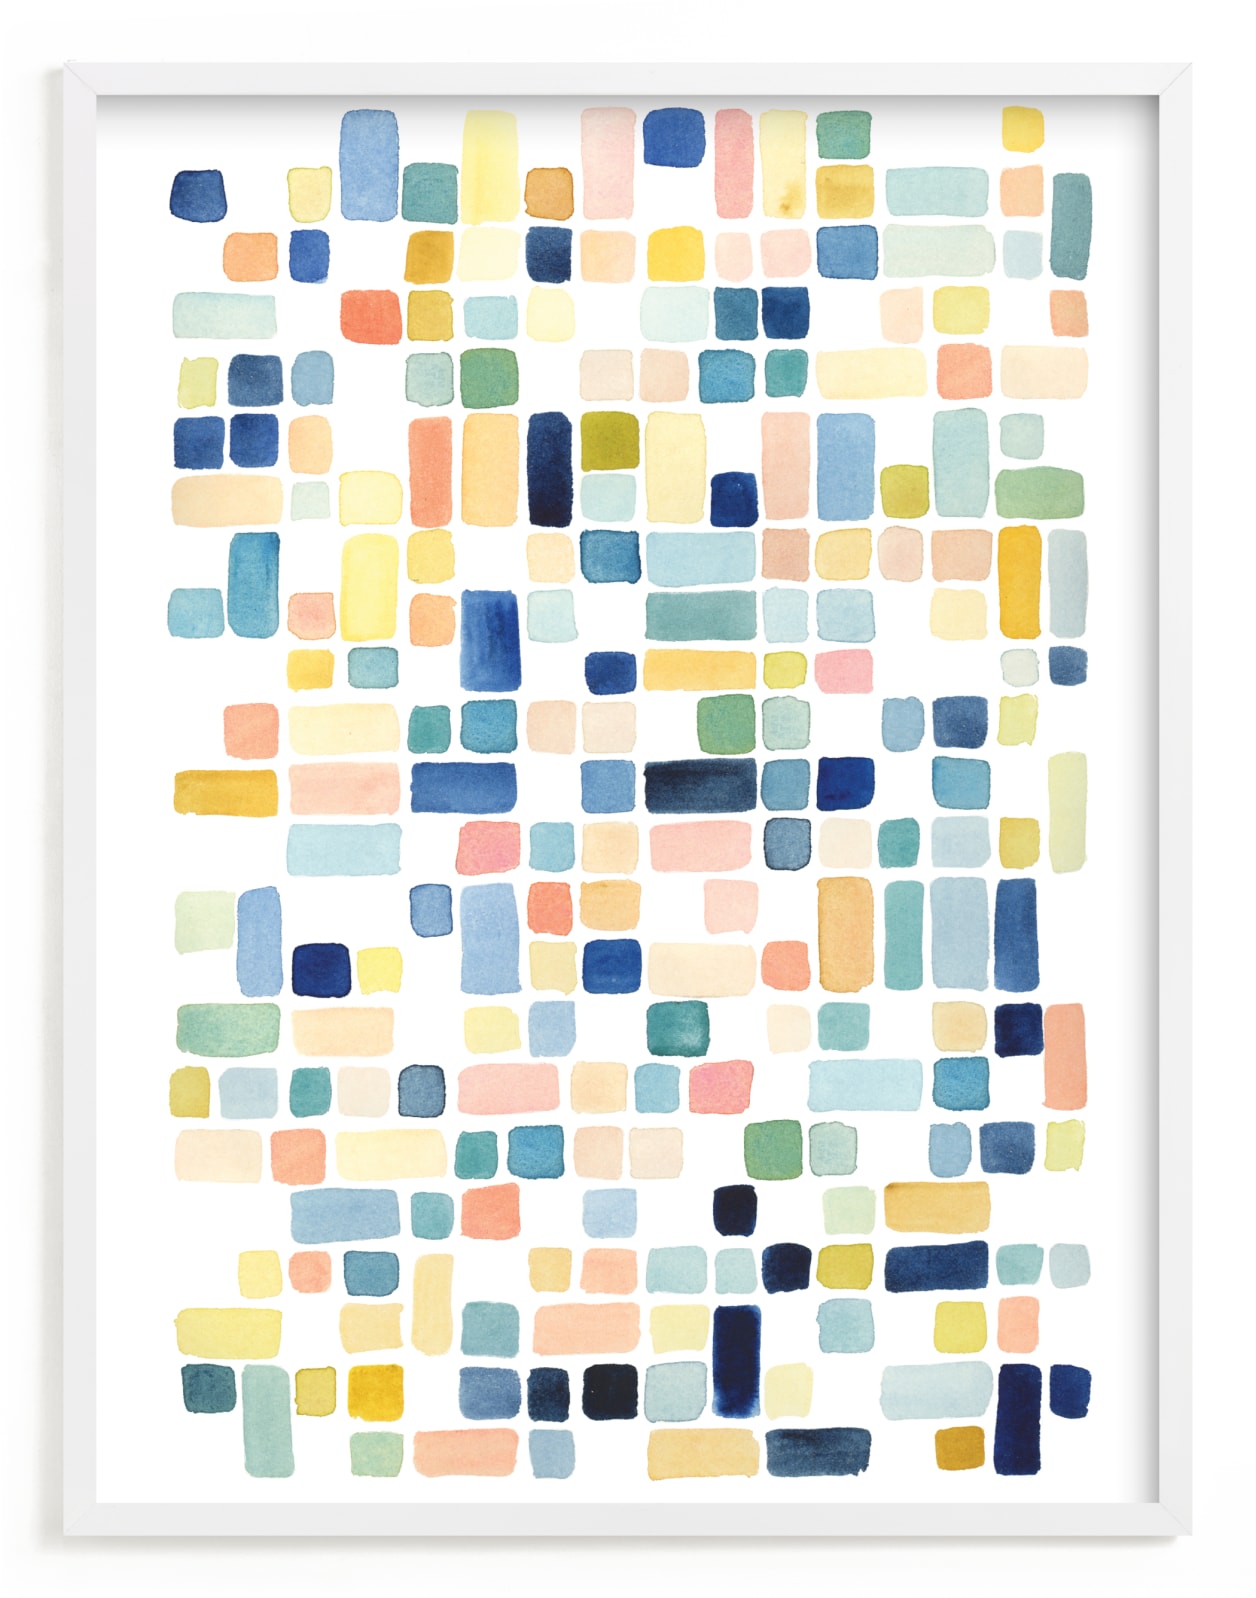 This is a blue art by Yao Cheng Design called Blue and Peach Squares.